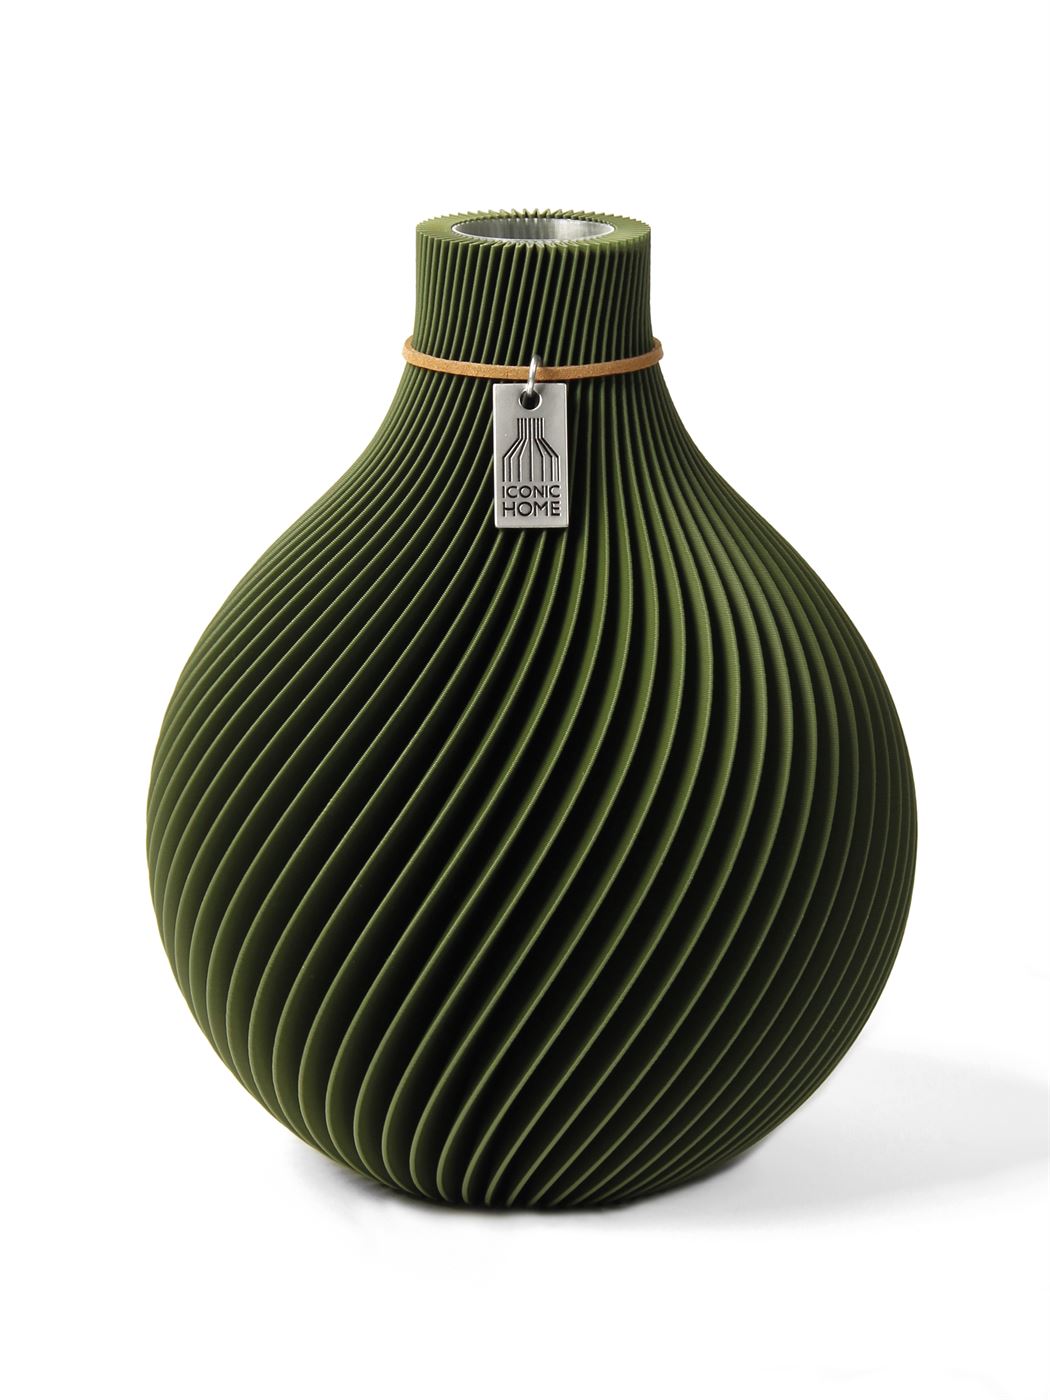 Vase Sphere grün Moss Green Small ICONIC HOME